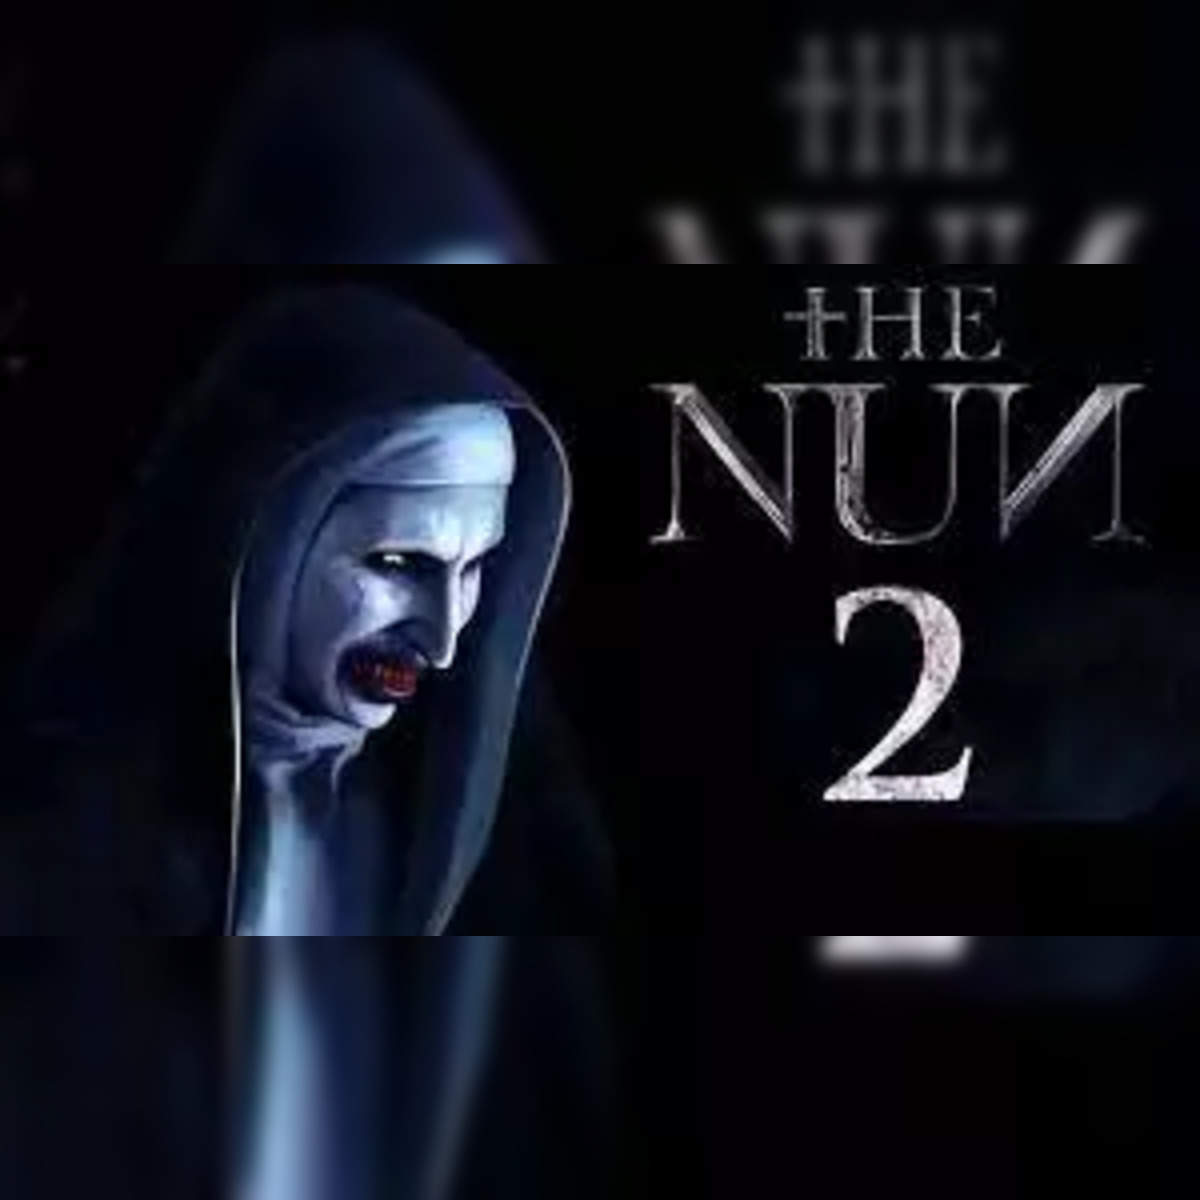 nun ii: The Nun II: See horror film's initial box office performance,  storyline, cast and more - The Economic Times